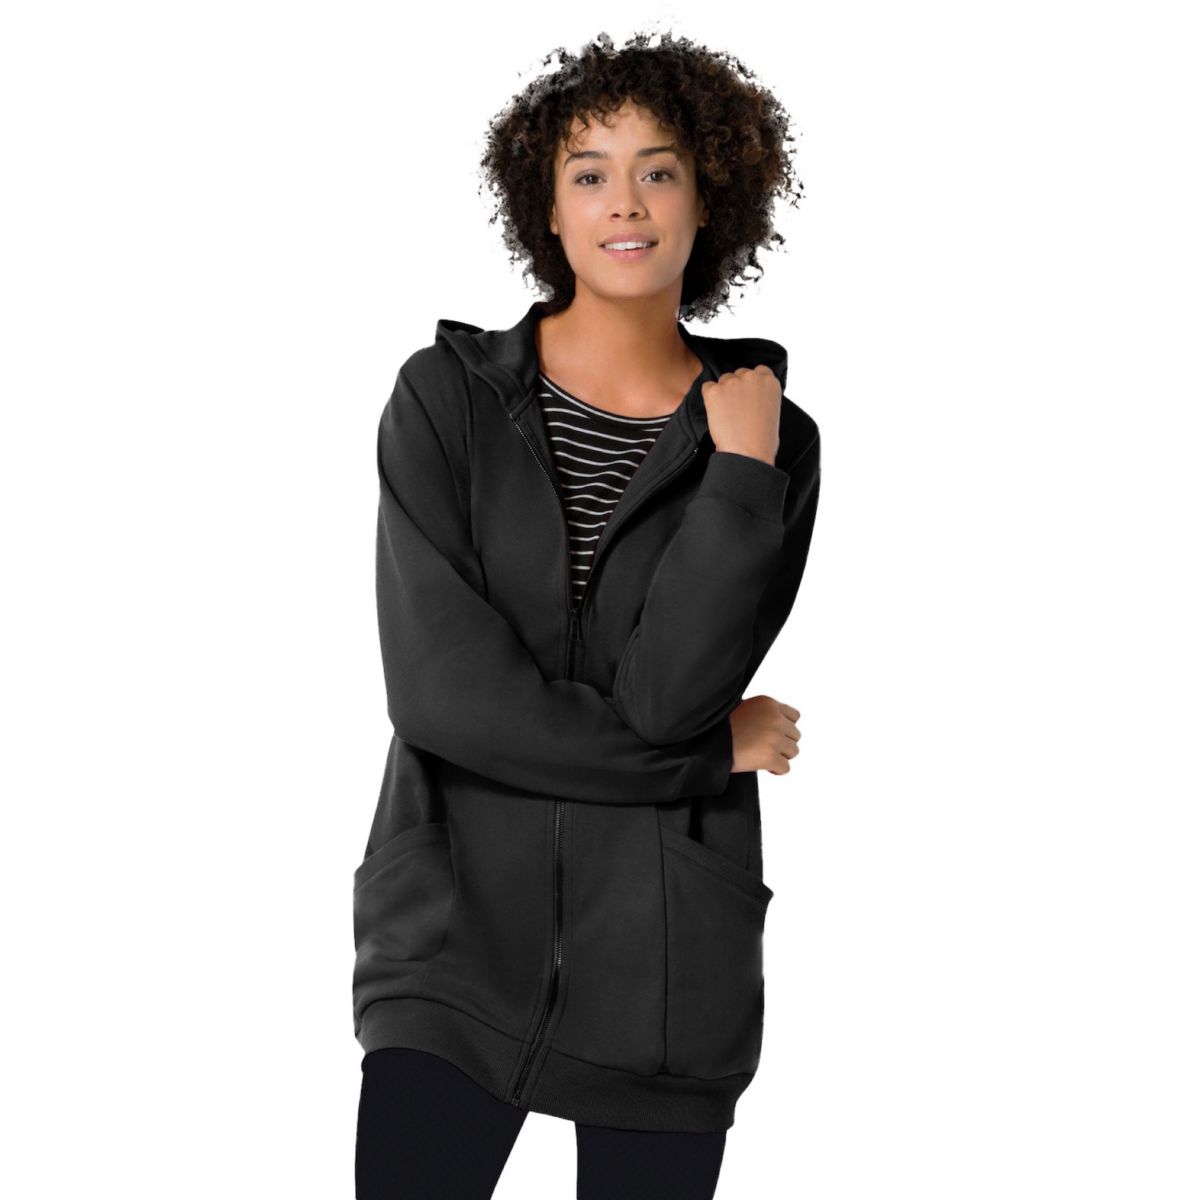 Woman Within Women's Plus Size Zip Front Tunic Hoodie Jacket Woman Within